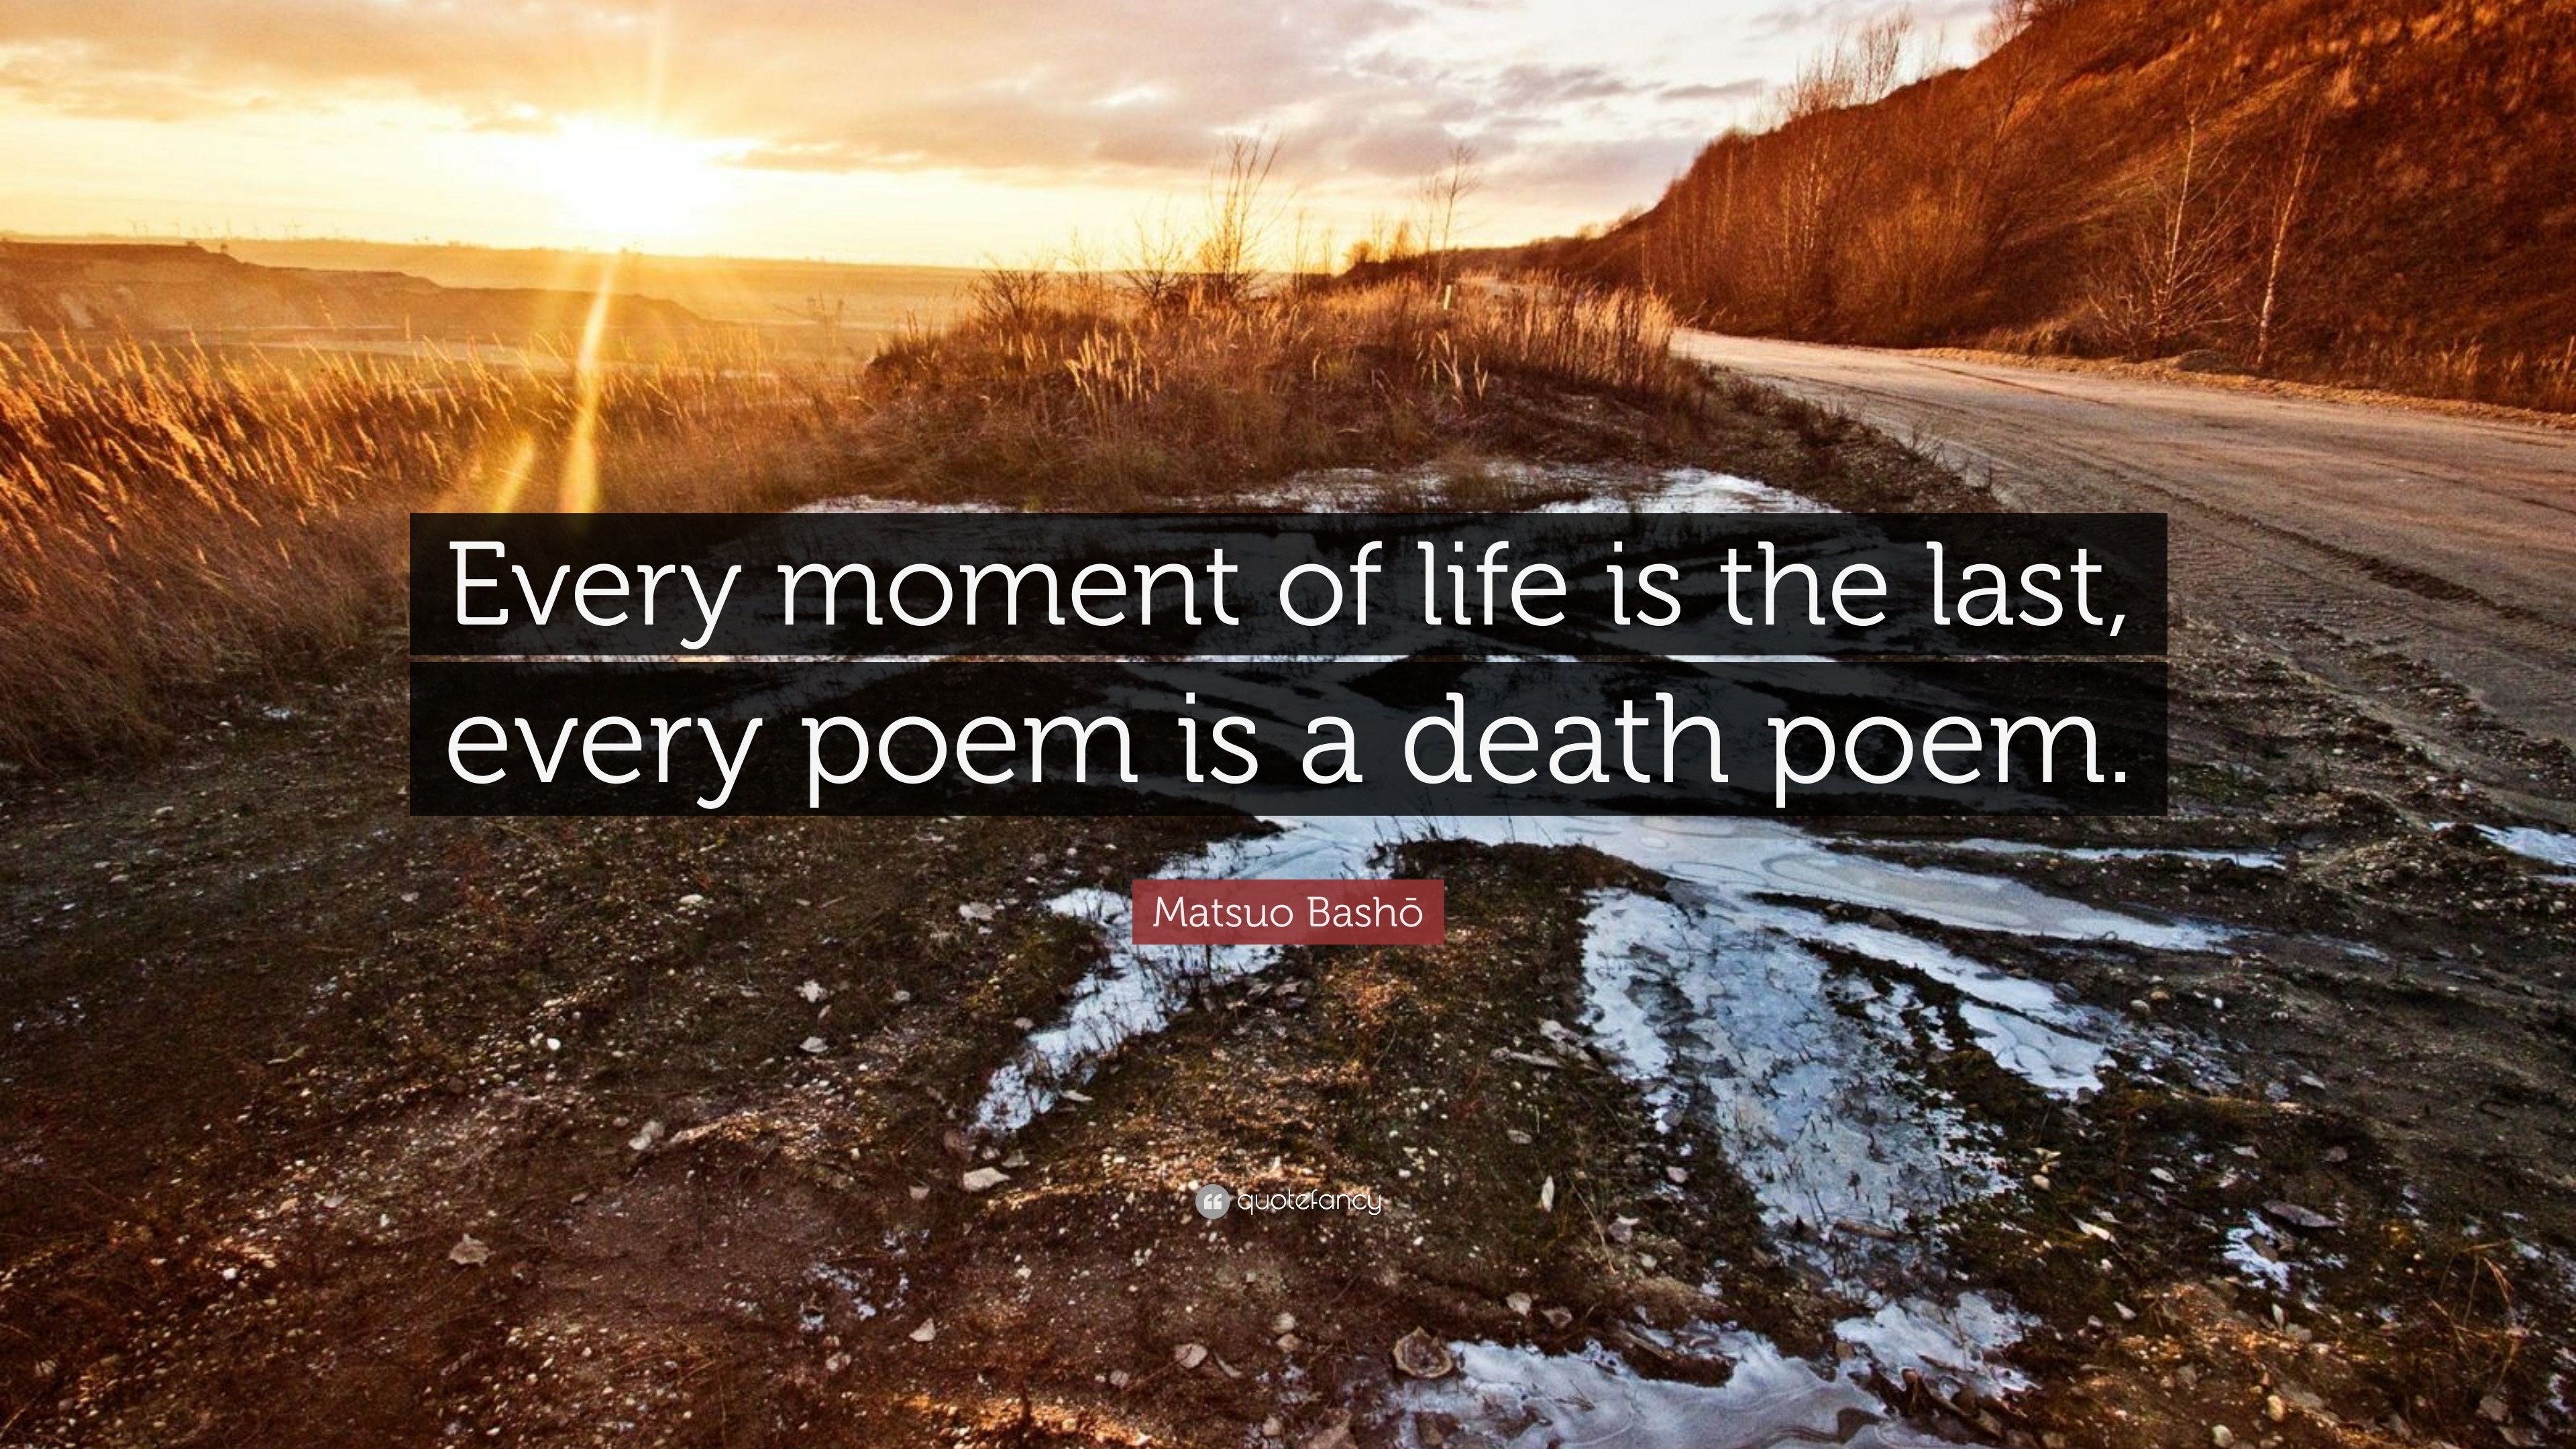 Matsuo Bashō Quote Every Moment Of Life Is The Last Every Poem Is A Death Poem